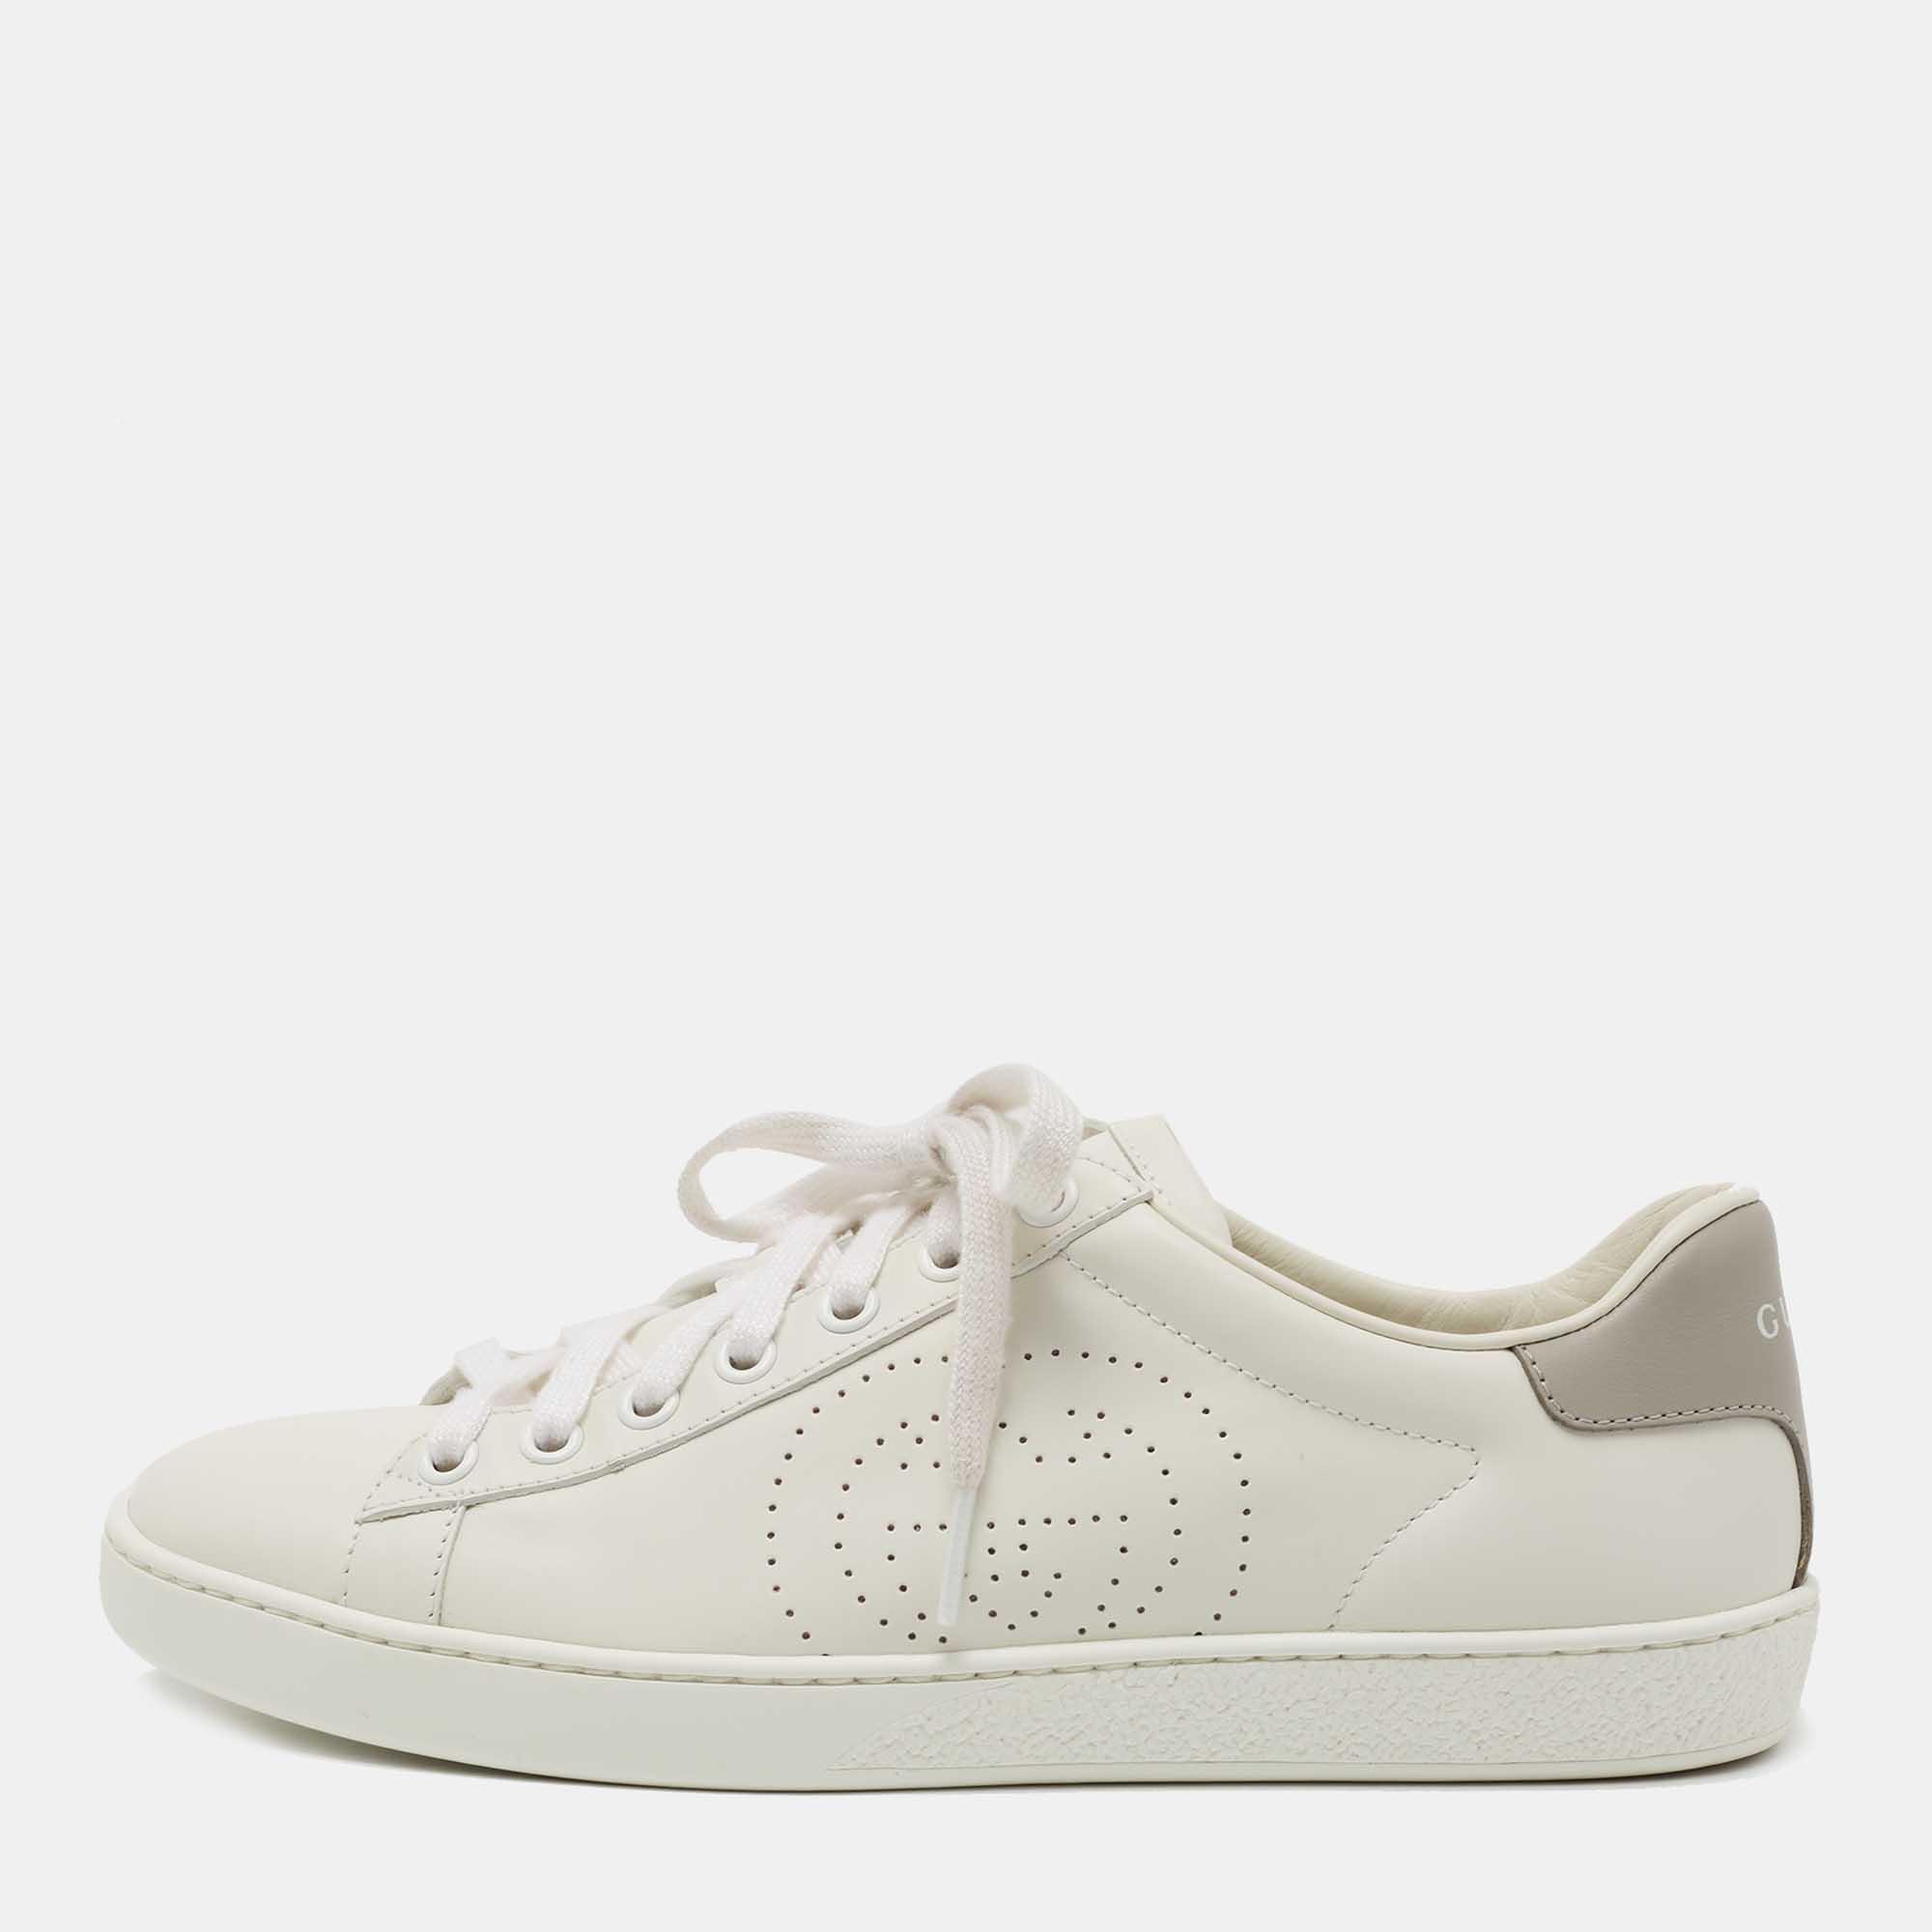 Pre-owned Gucci White/grey Leather Perforated Gg Ace Sneakers Size 37